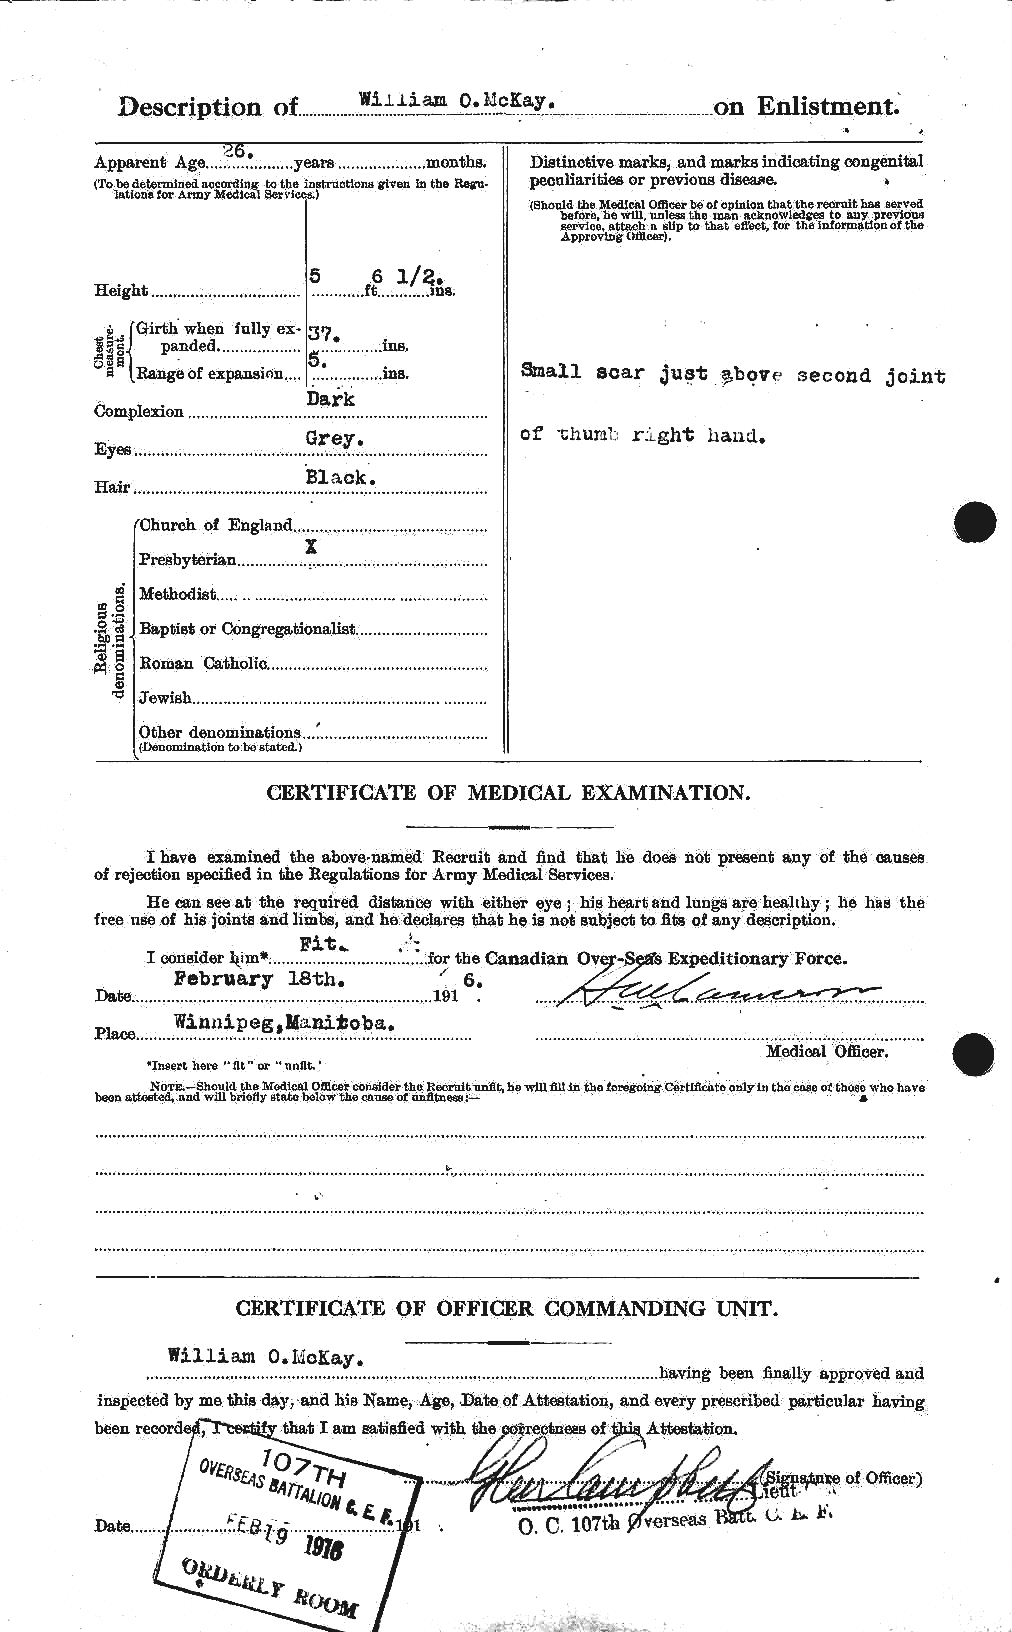 Personnel Records of the First World War - CEF 530310b